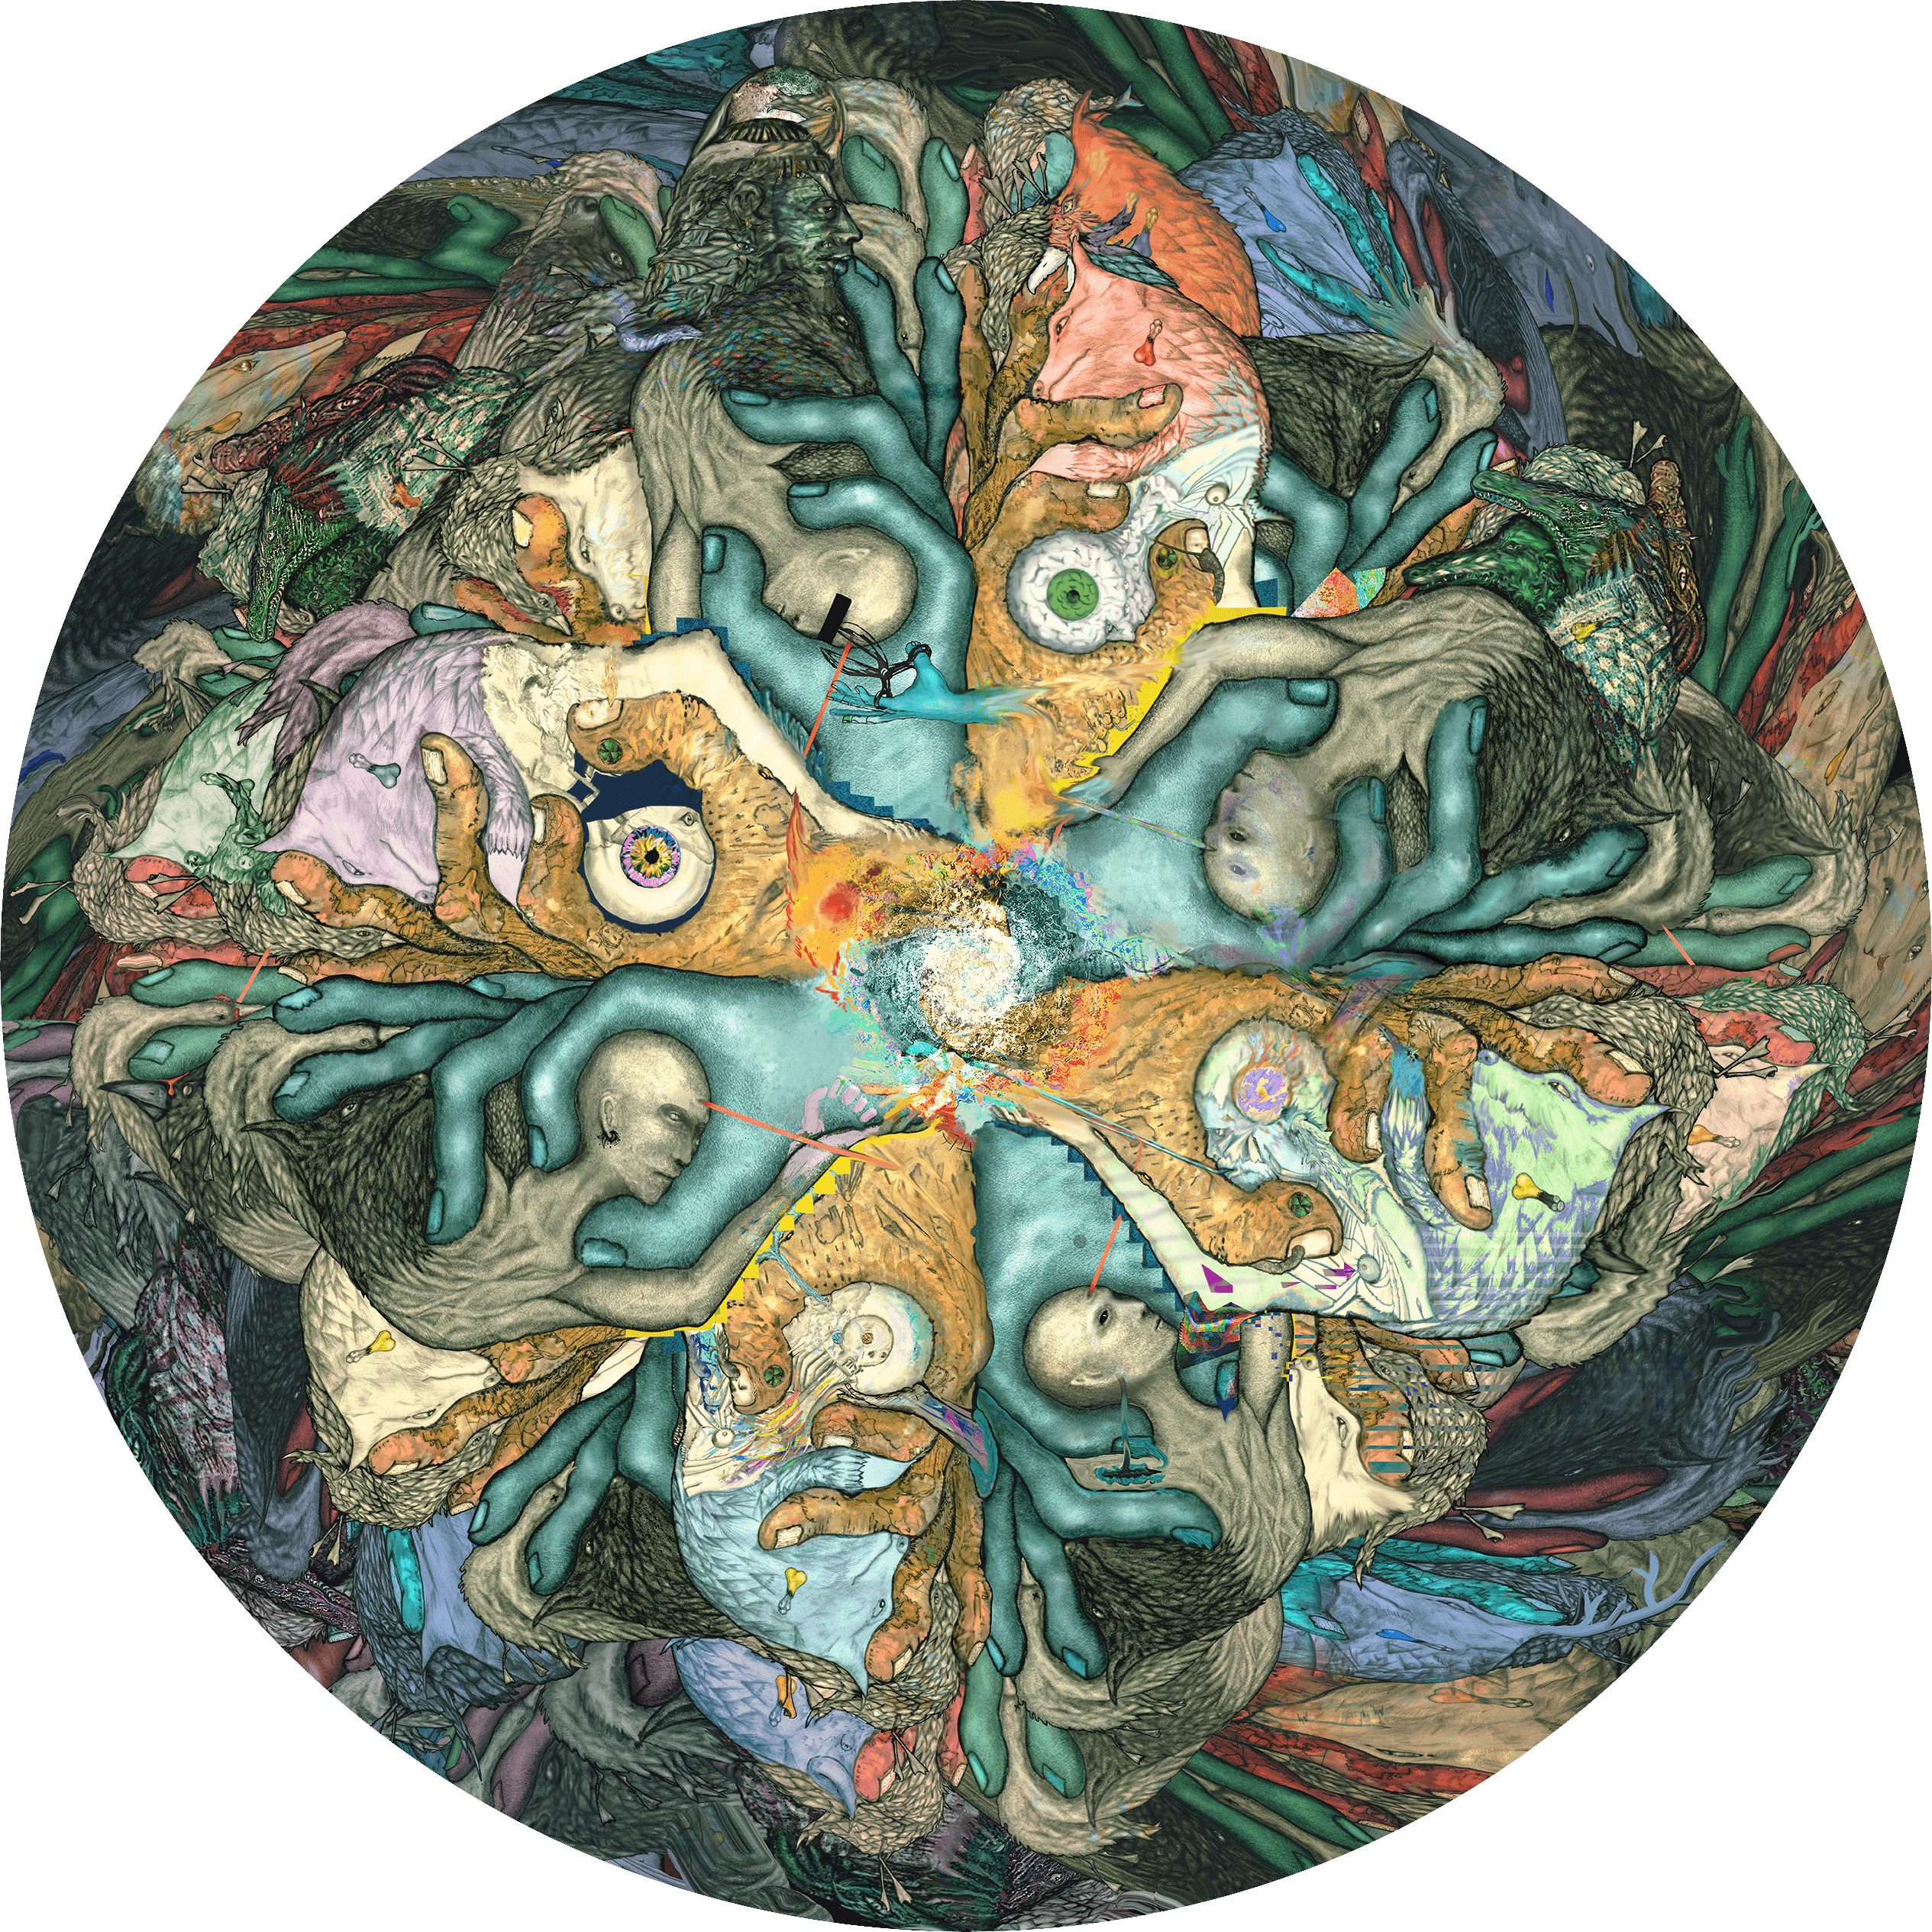 An Escher style drawing of fantasy characters in a swirl